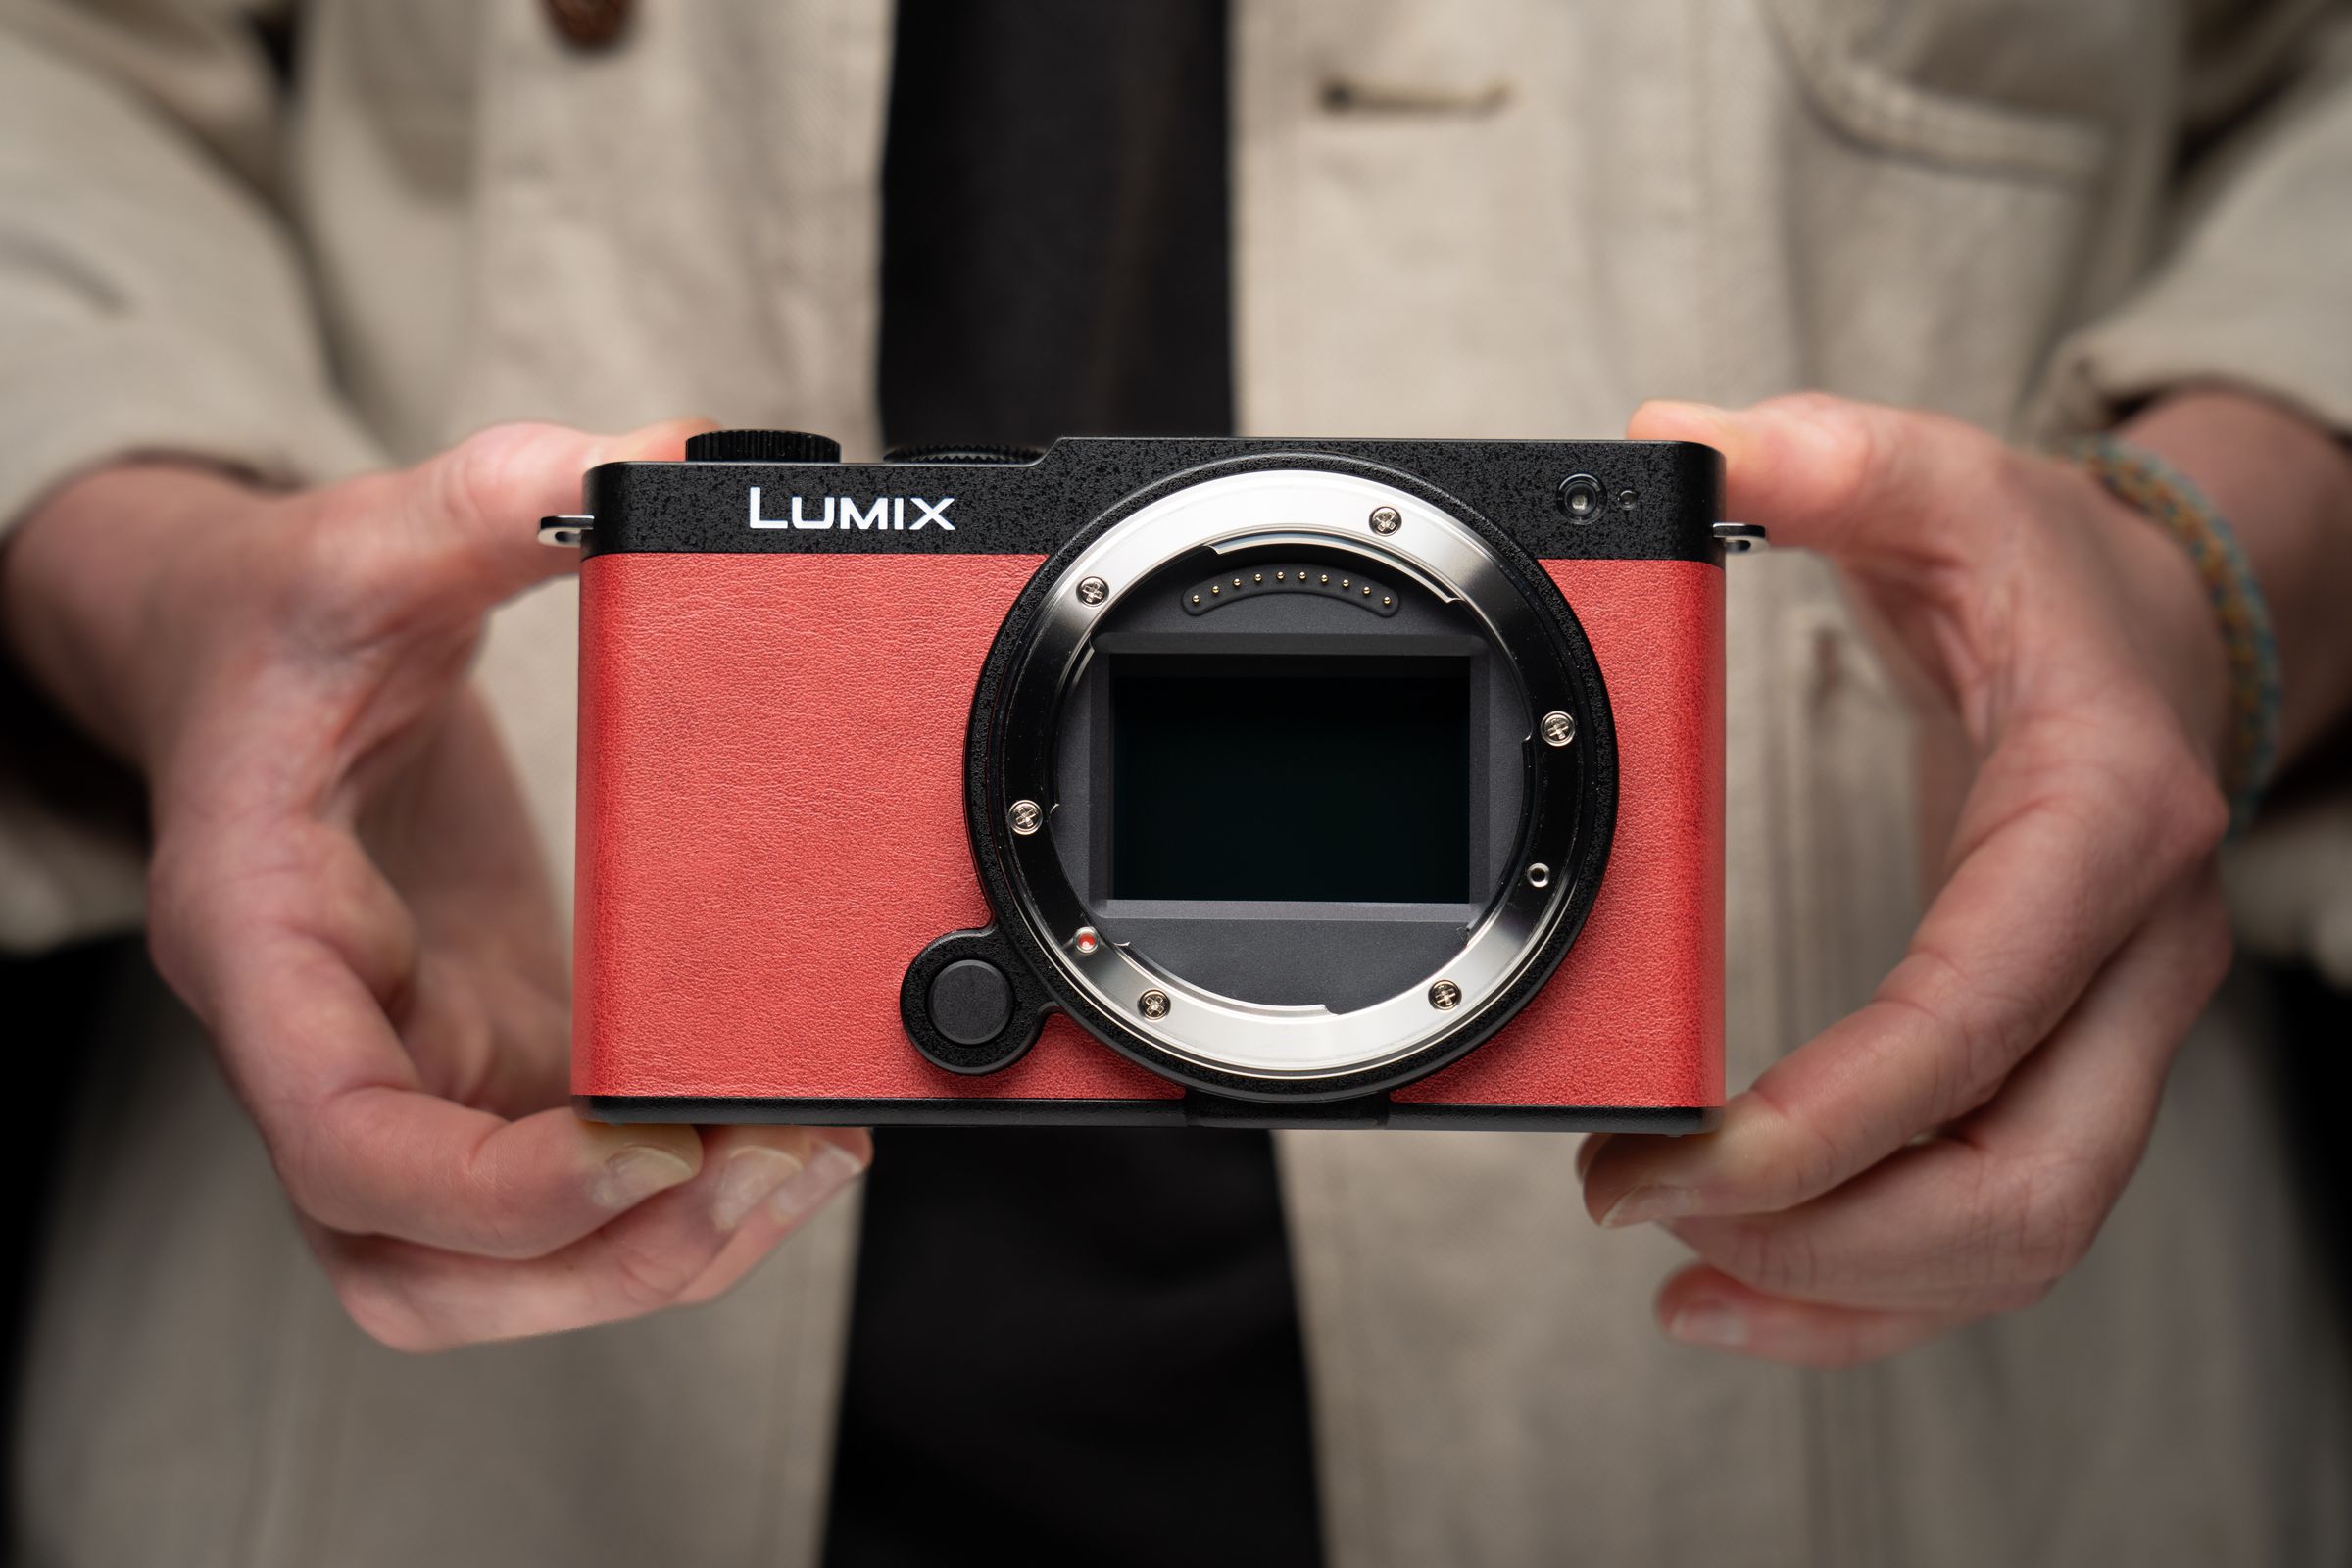 The Panasonic Lumix S9 is a new $1,500 full-frame camera that comes in four colors.